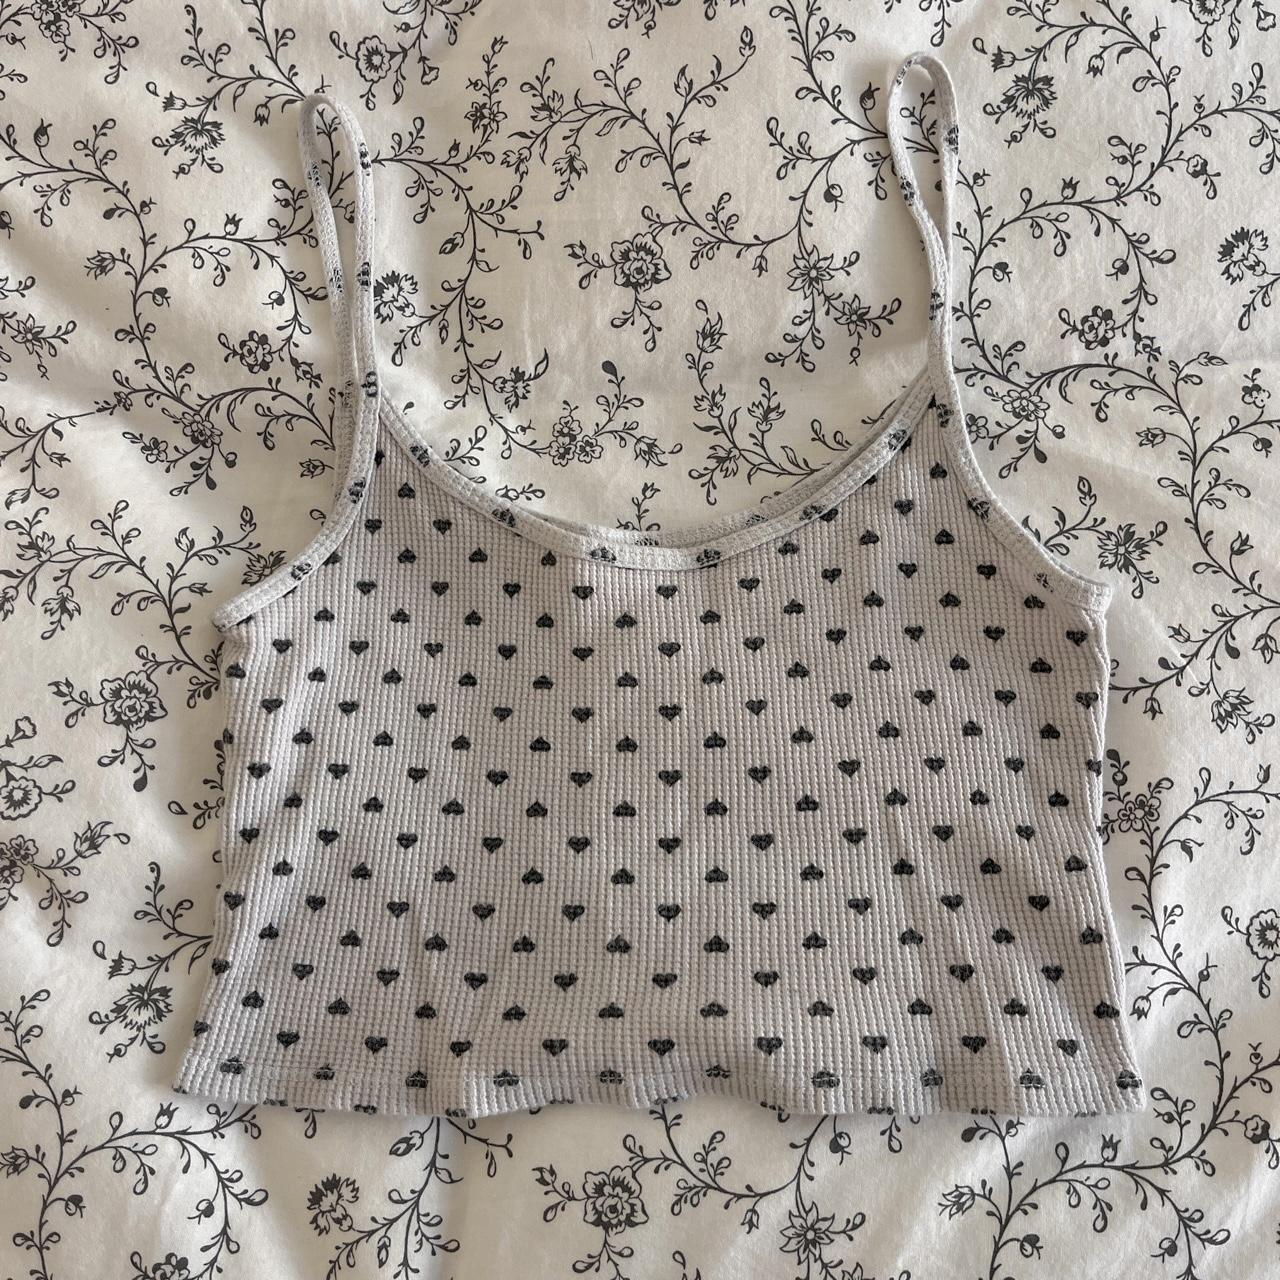 Brandy Melville pink skylar heart tank - $31 New With Tags - From Diane